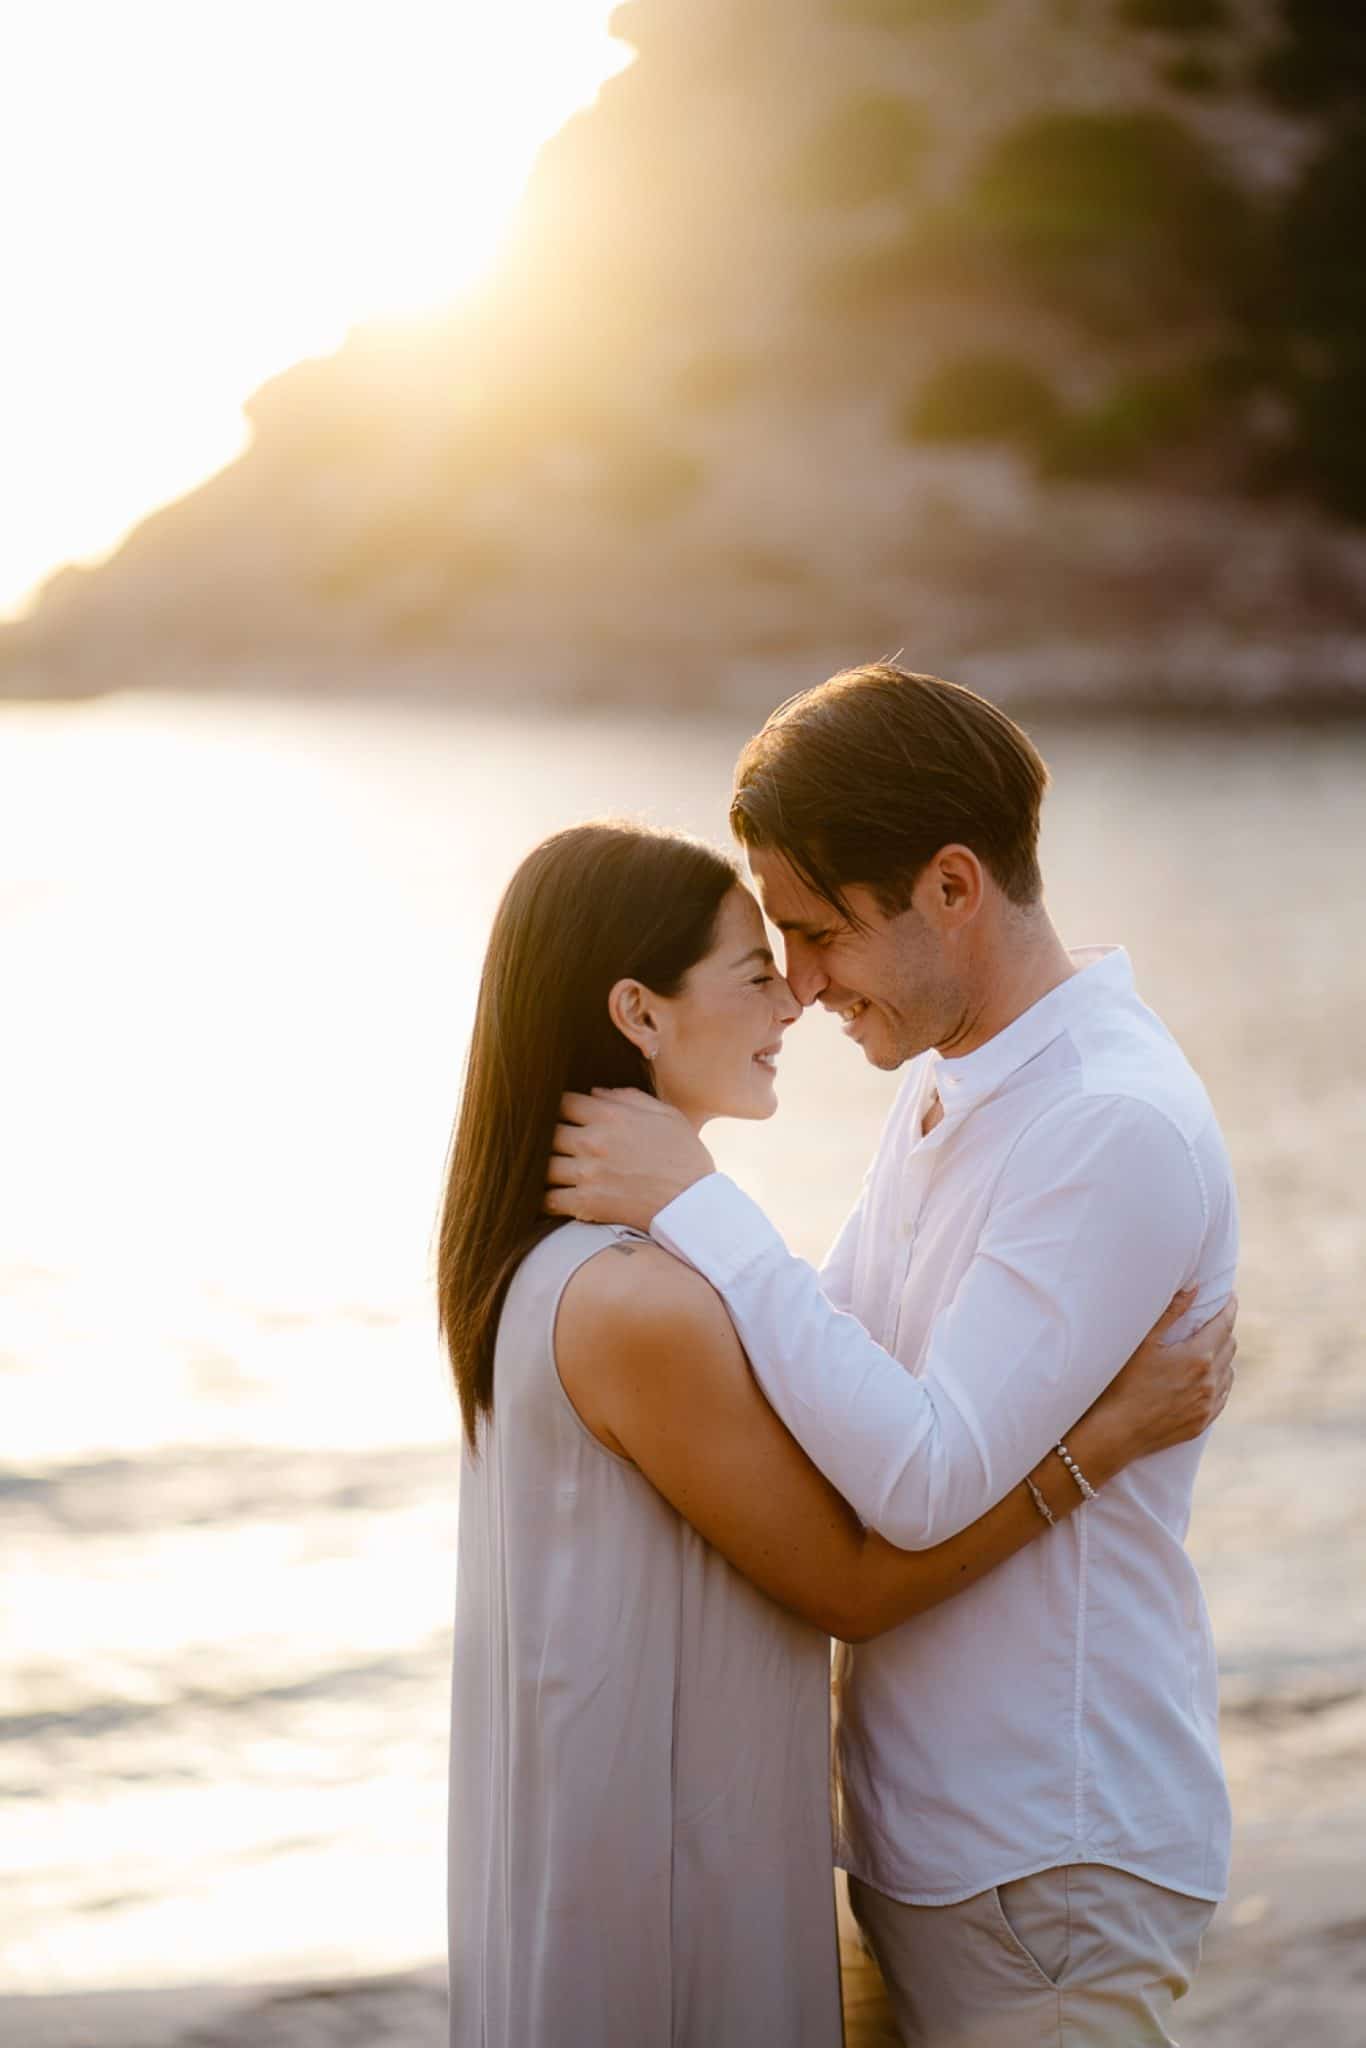 Intimate moments captured by Alghero photographer Valeria Mameli during a couple's honeymoon